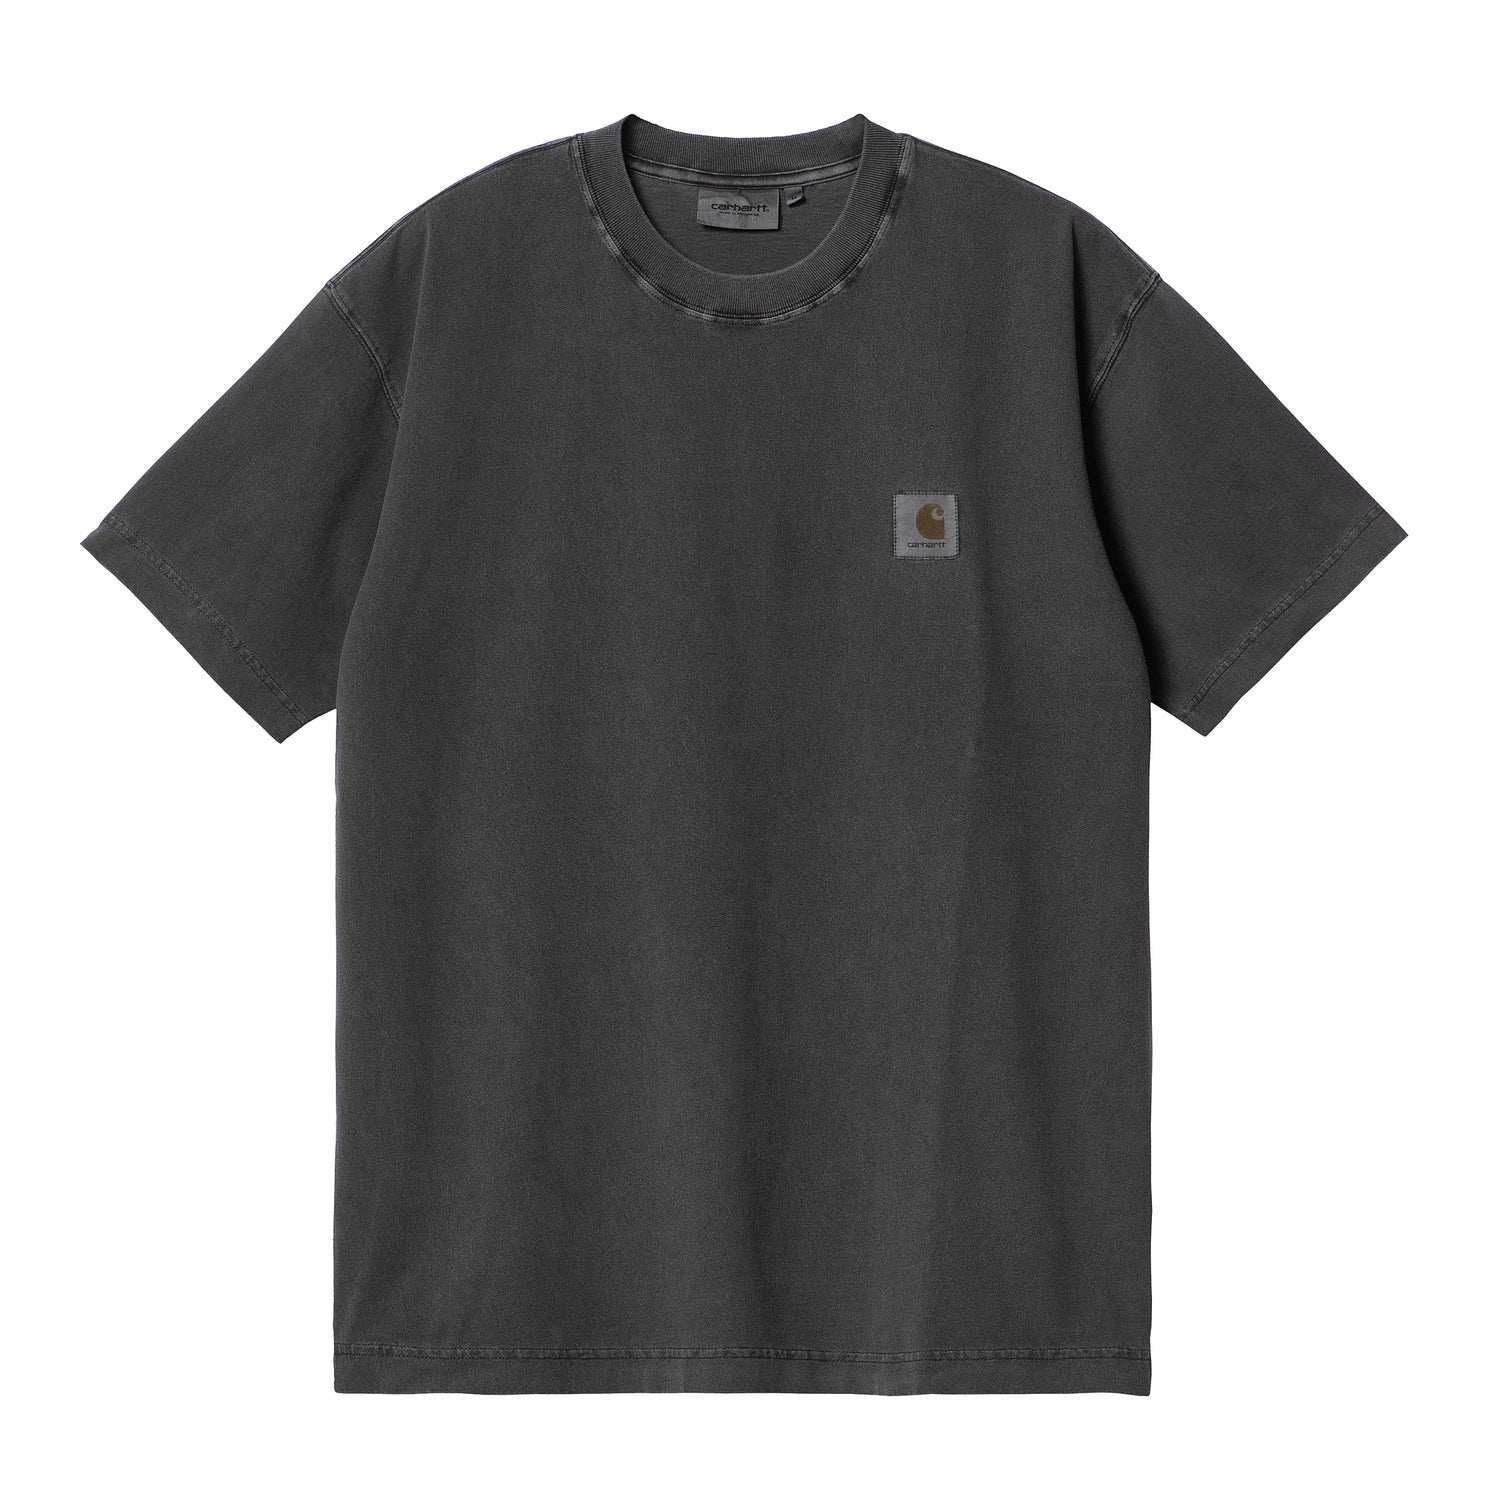 S/S NELSON T-SHIRT CHARCOAL GARMENT DYED